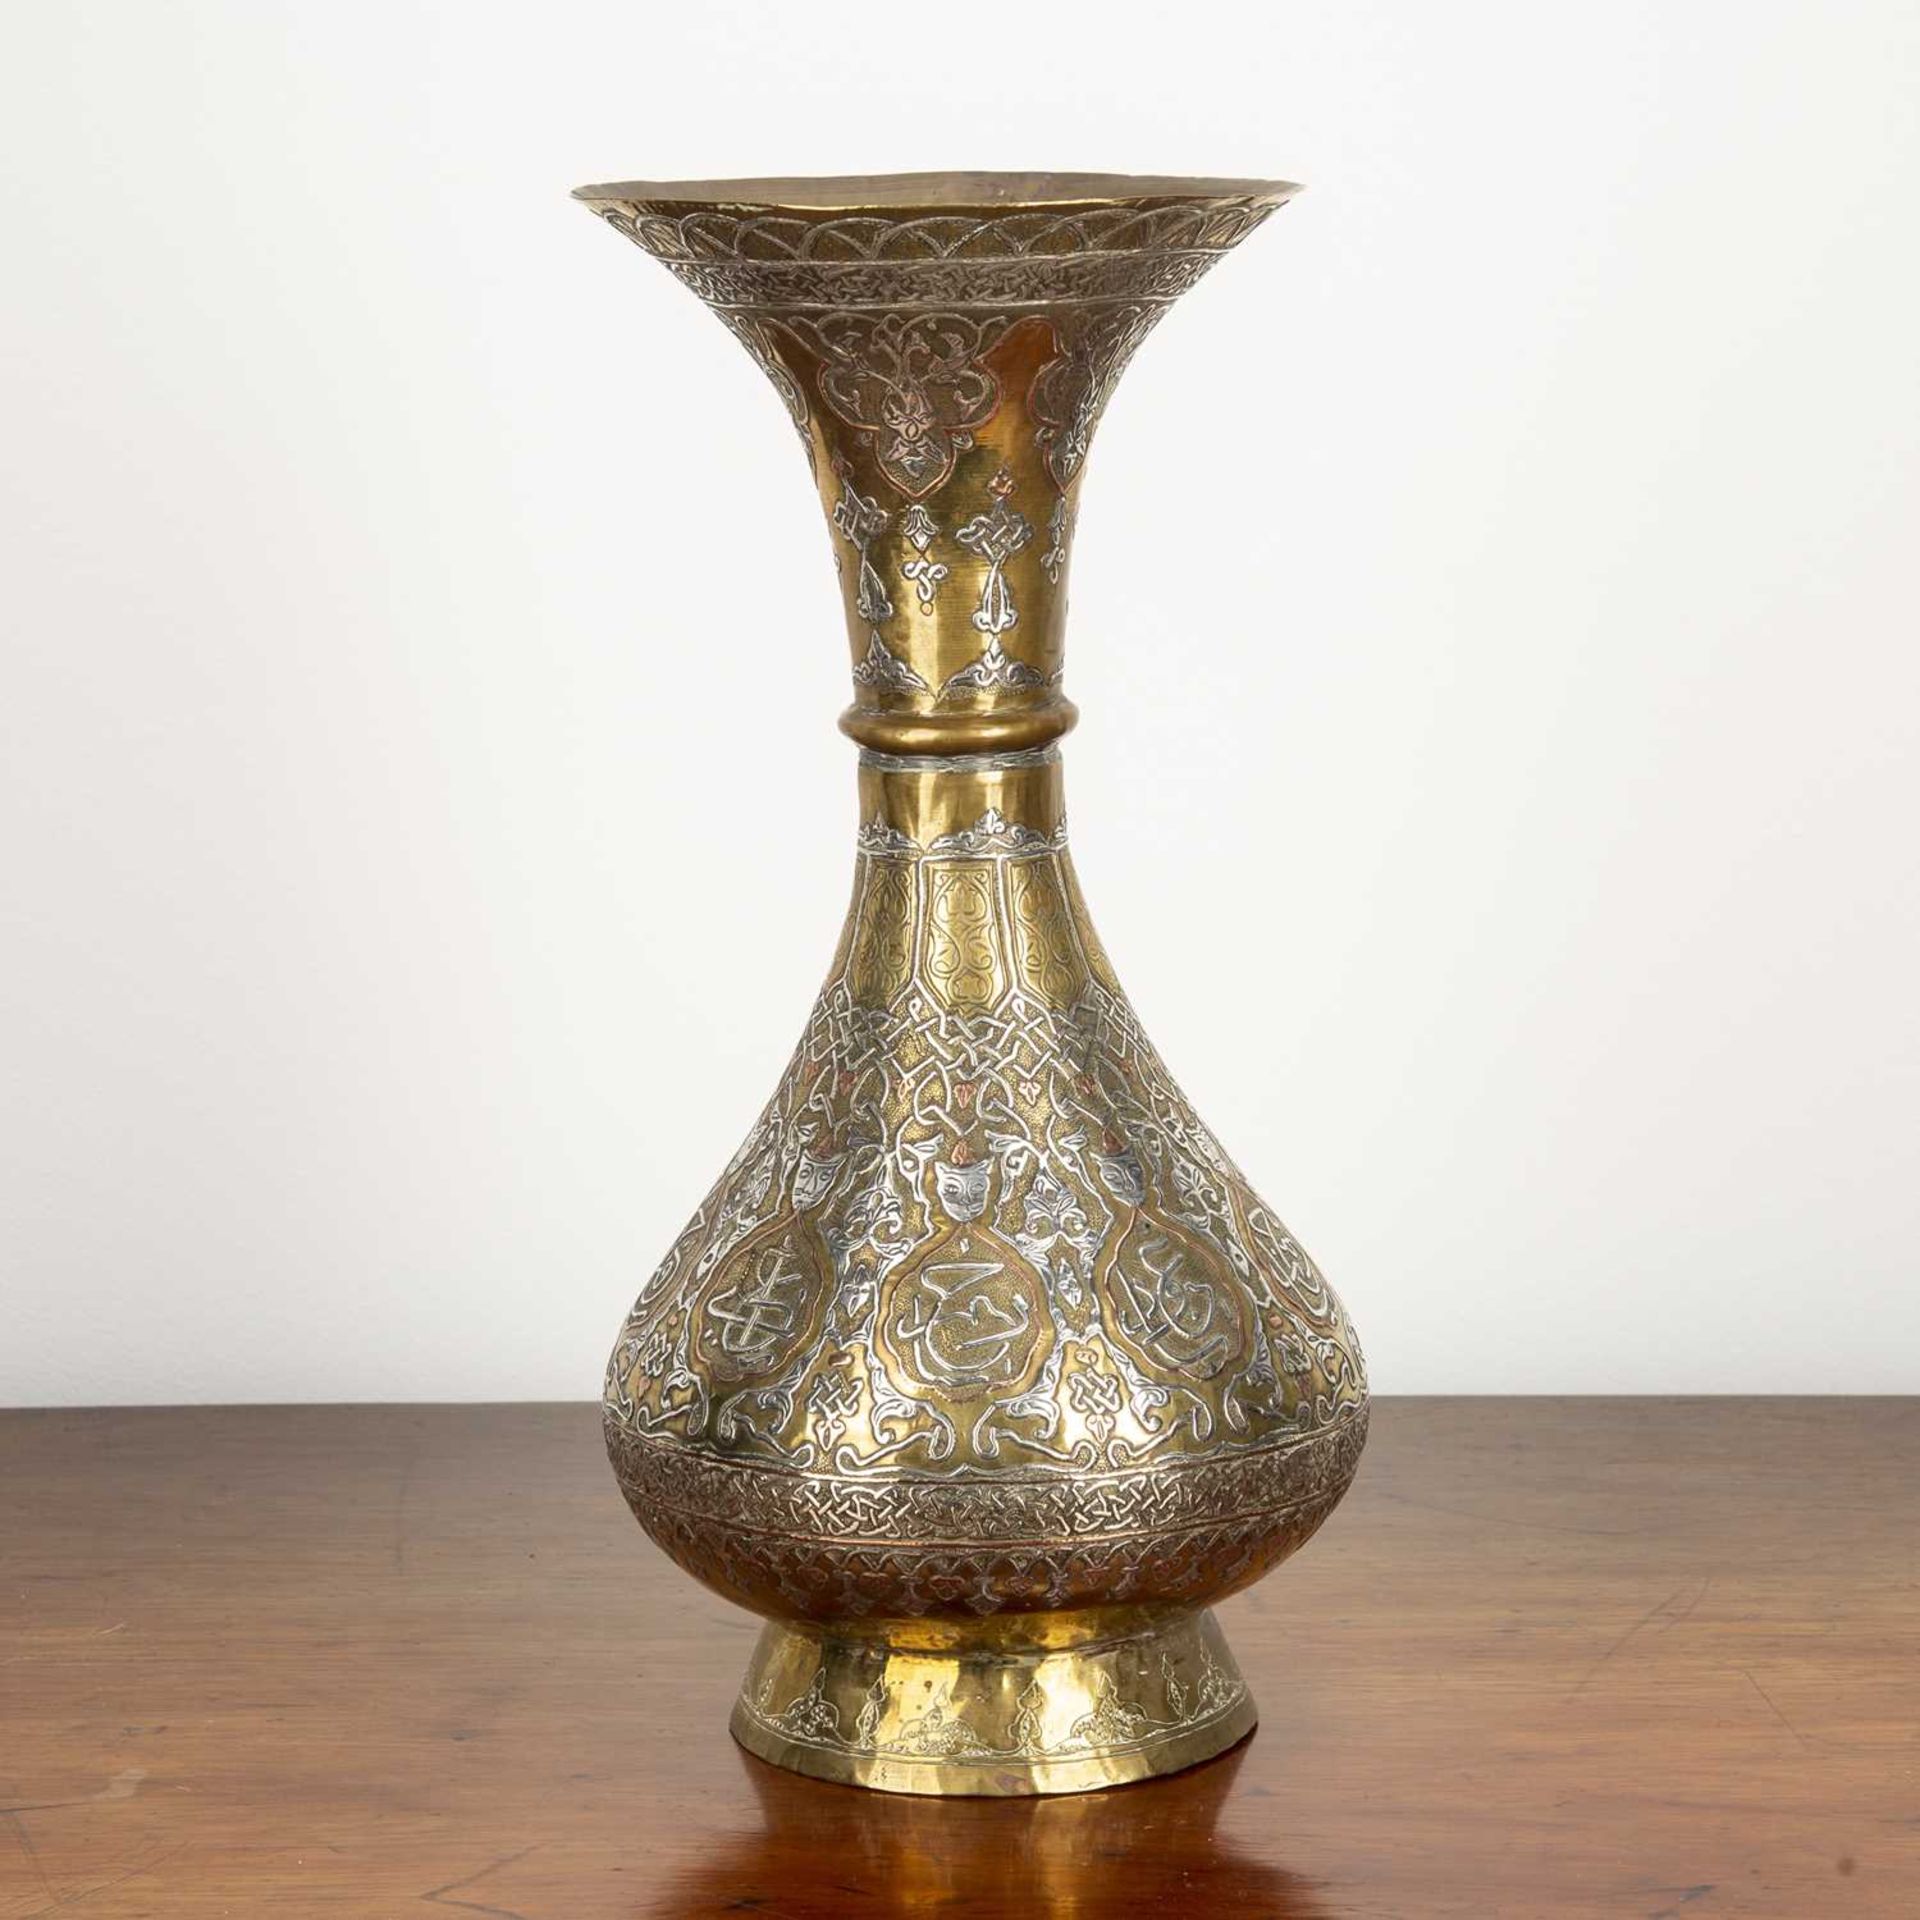 Silver inlay brass vase Iranian, decorated with figures and calligraphy, 34cm highAt present,